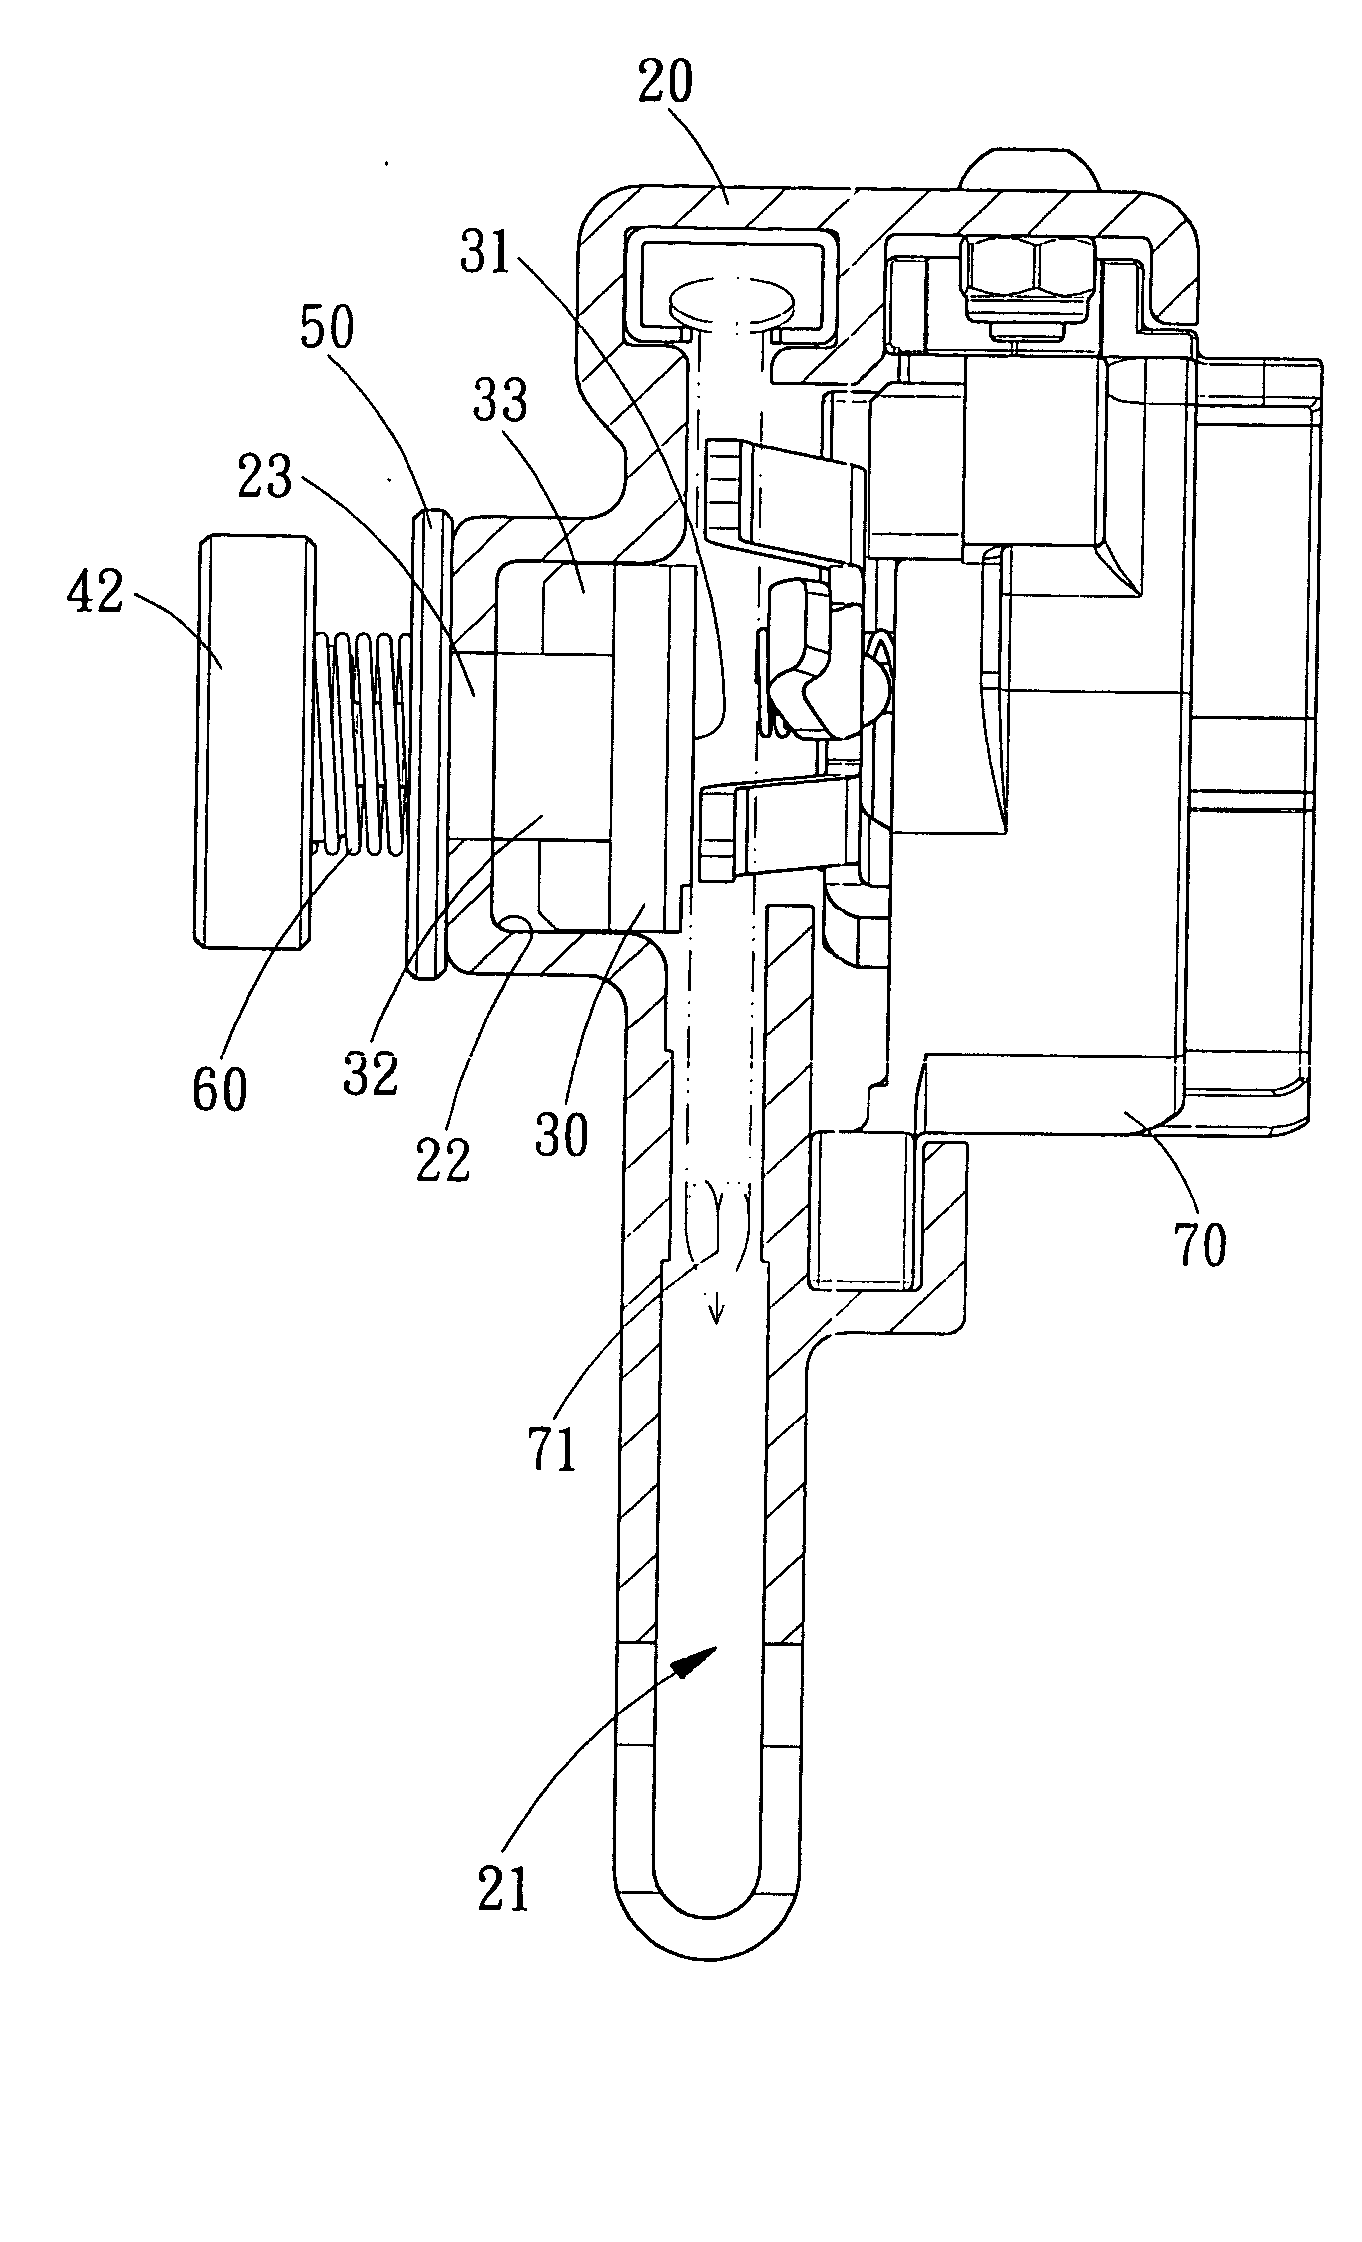 Apparatus for adjusting width of drive channel of nailer